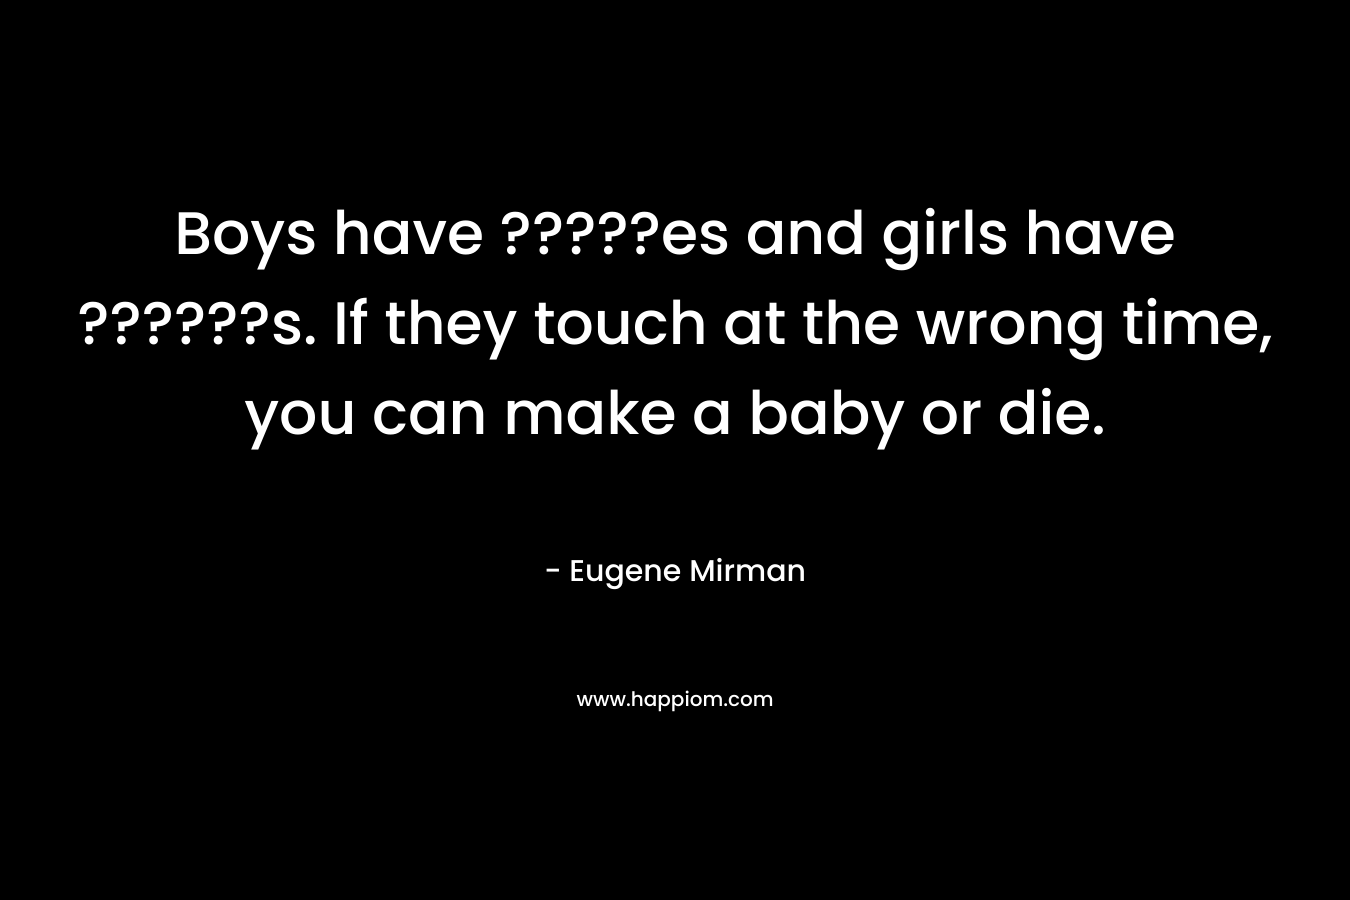 Boys have ?????es and girls have ??????s. If they touch at the wrong time, you can make a baby or die. – Eugene Mirman